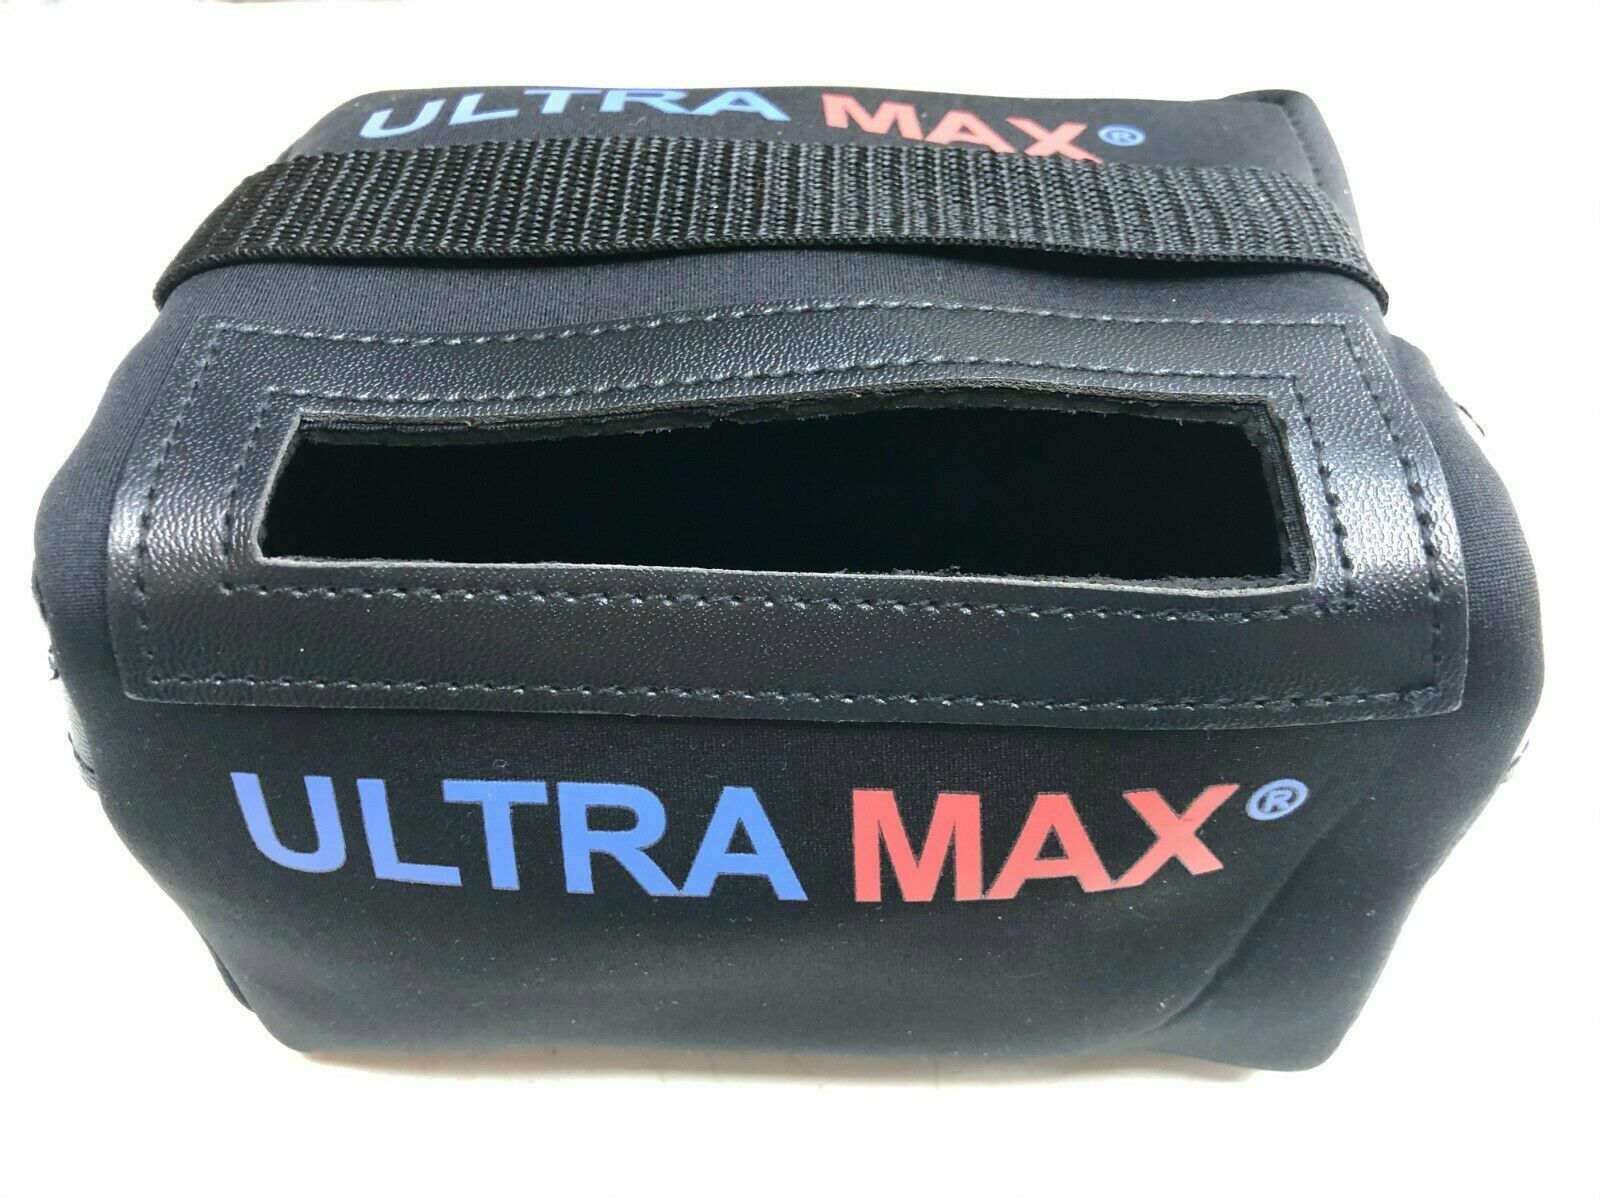 Ultramax Battery Bag for 36 Hole Ultramax Lithium Golf Trolley Batteries Only